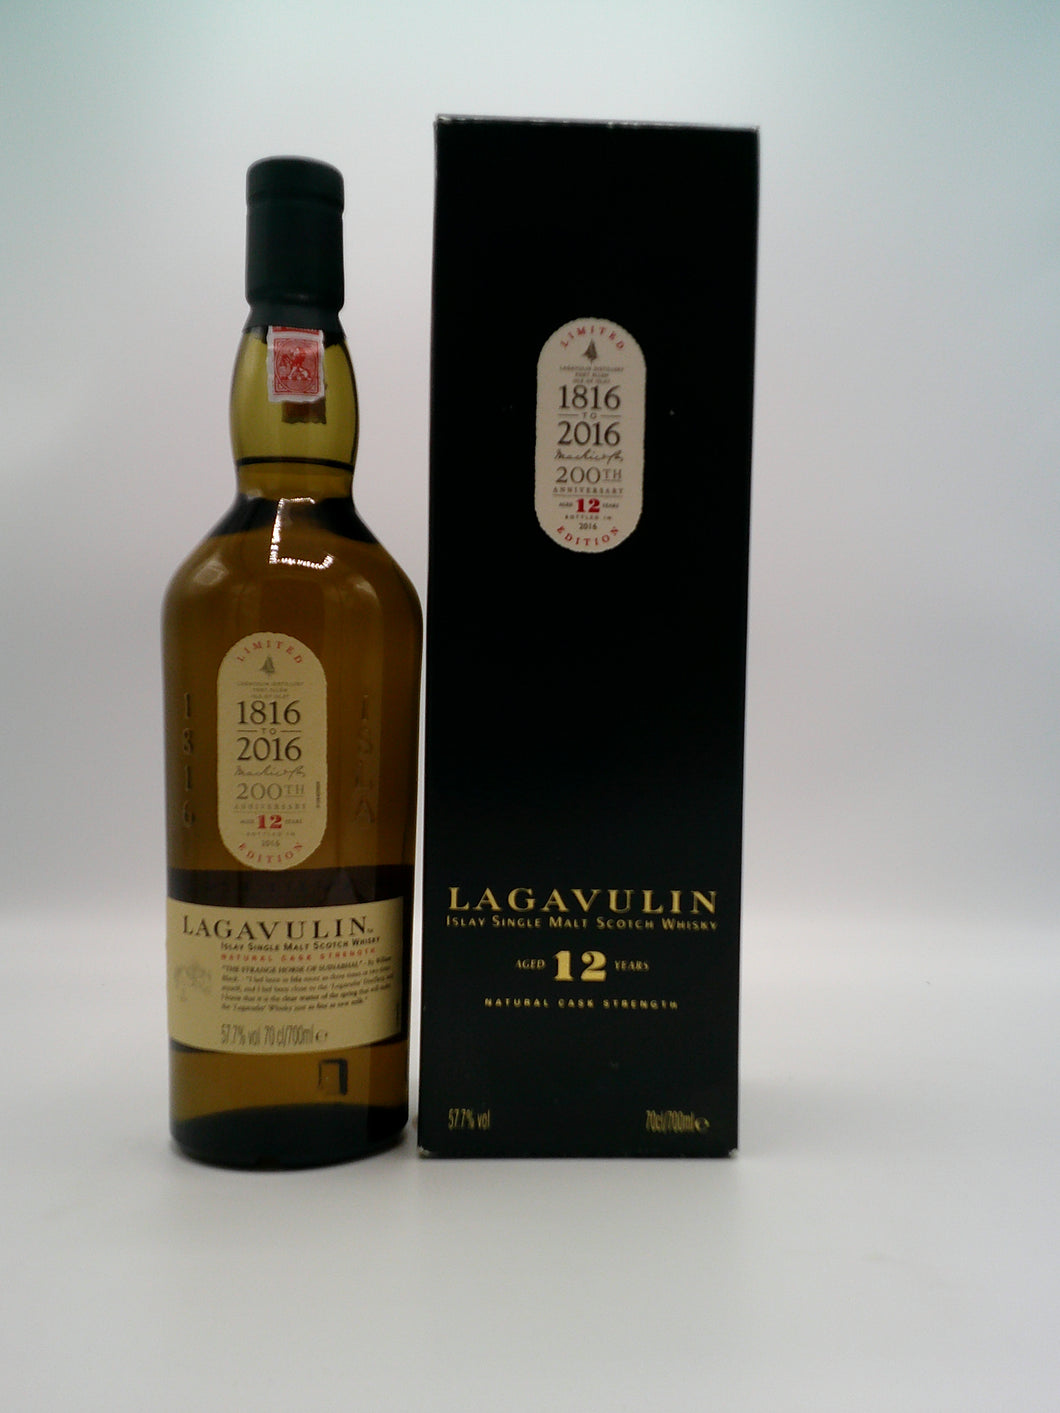 Lagavulin 12 Year Old Cask Strength 2016 Release Bicentenary Edition